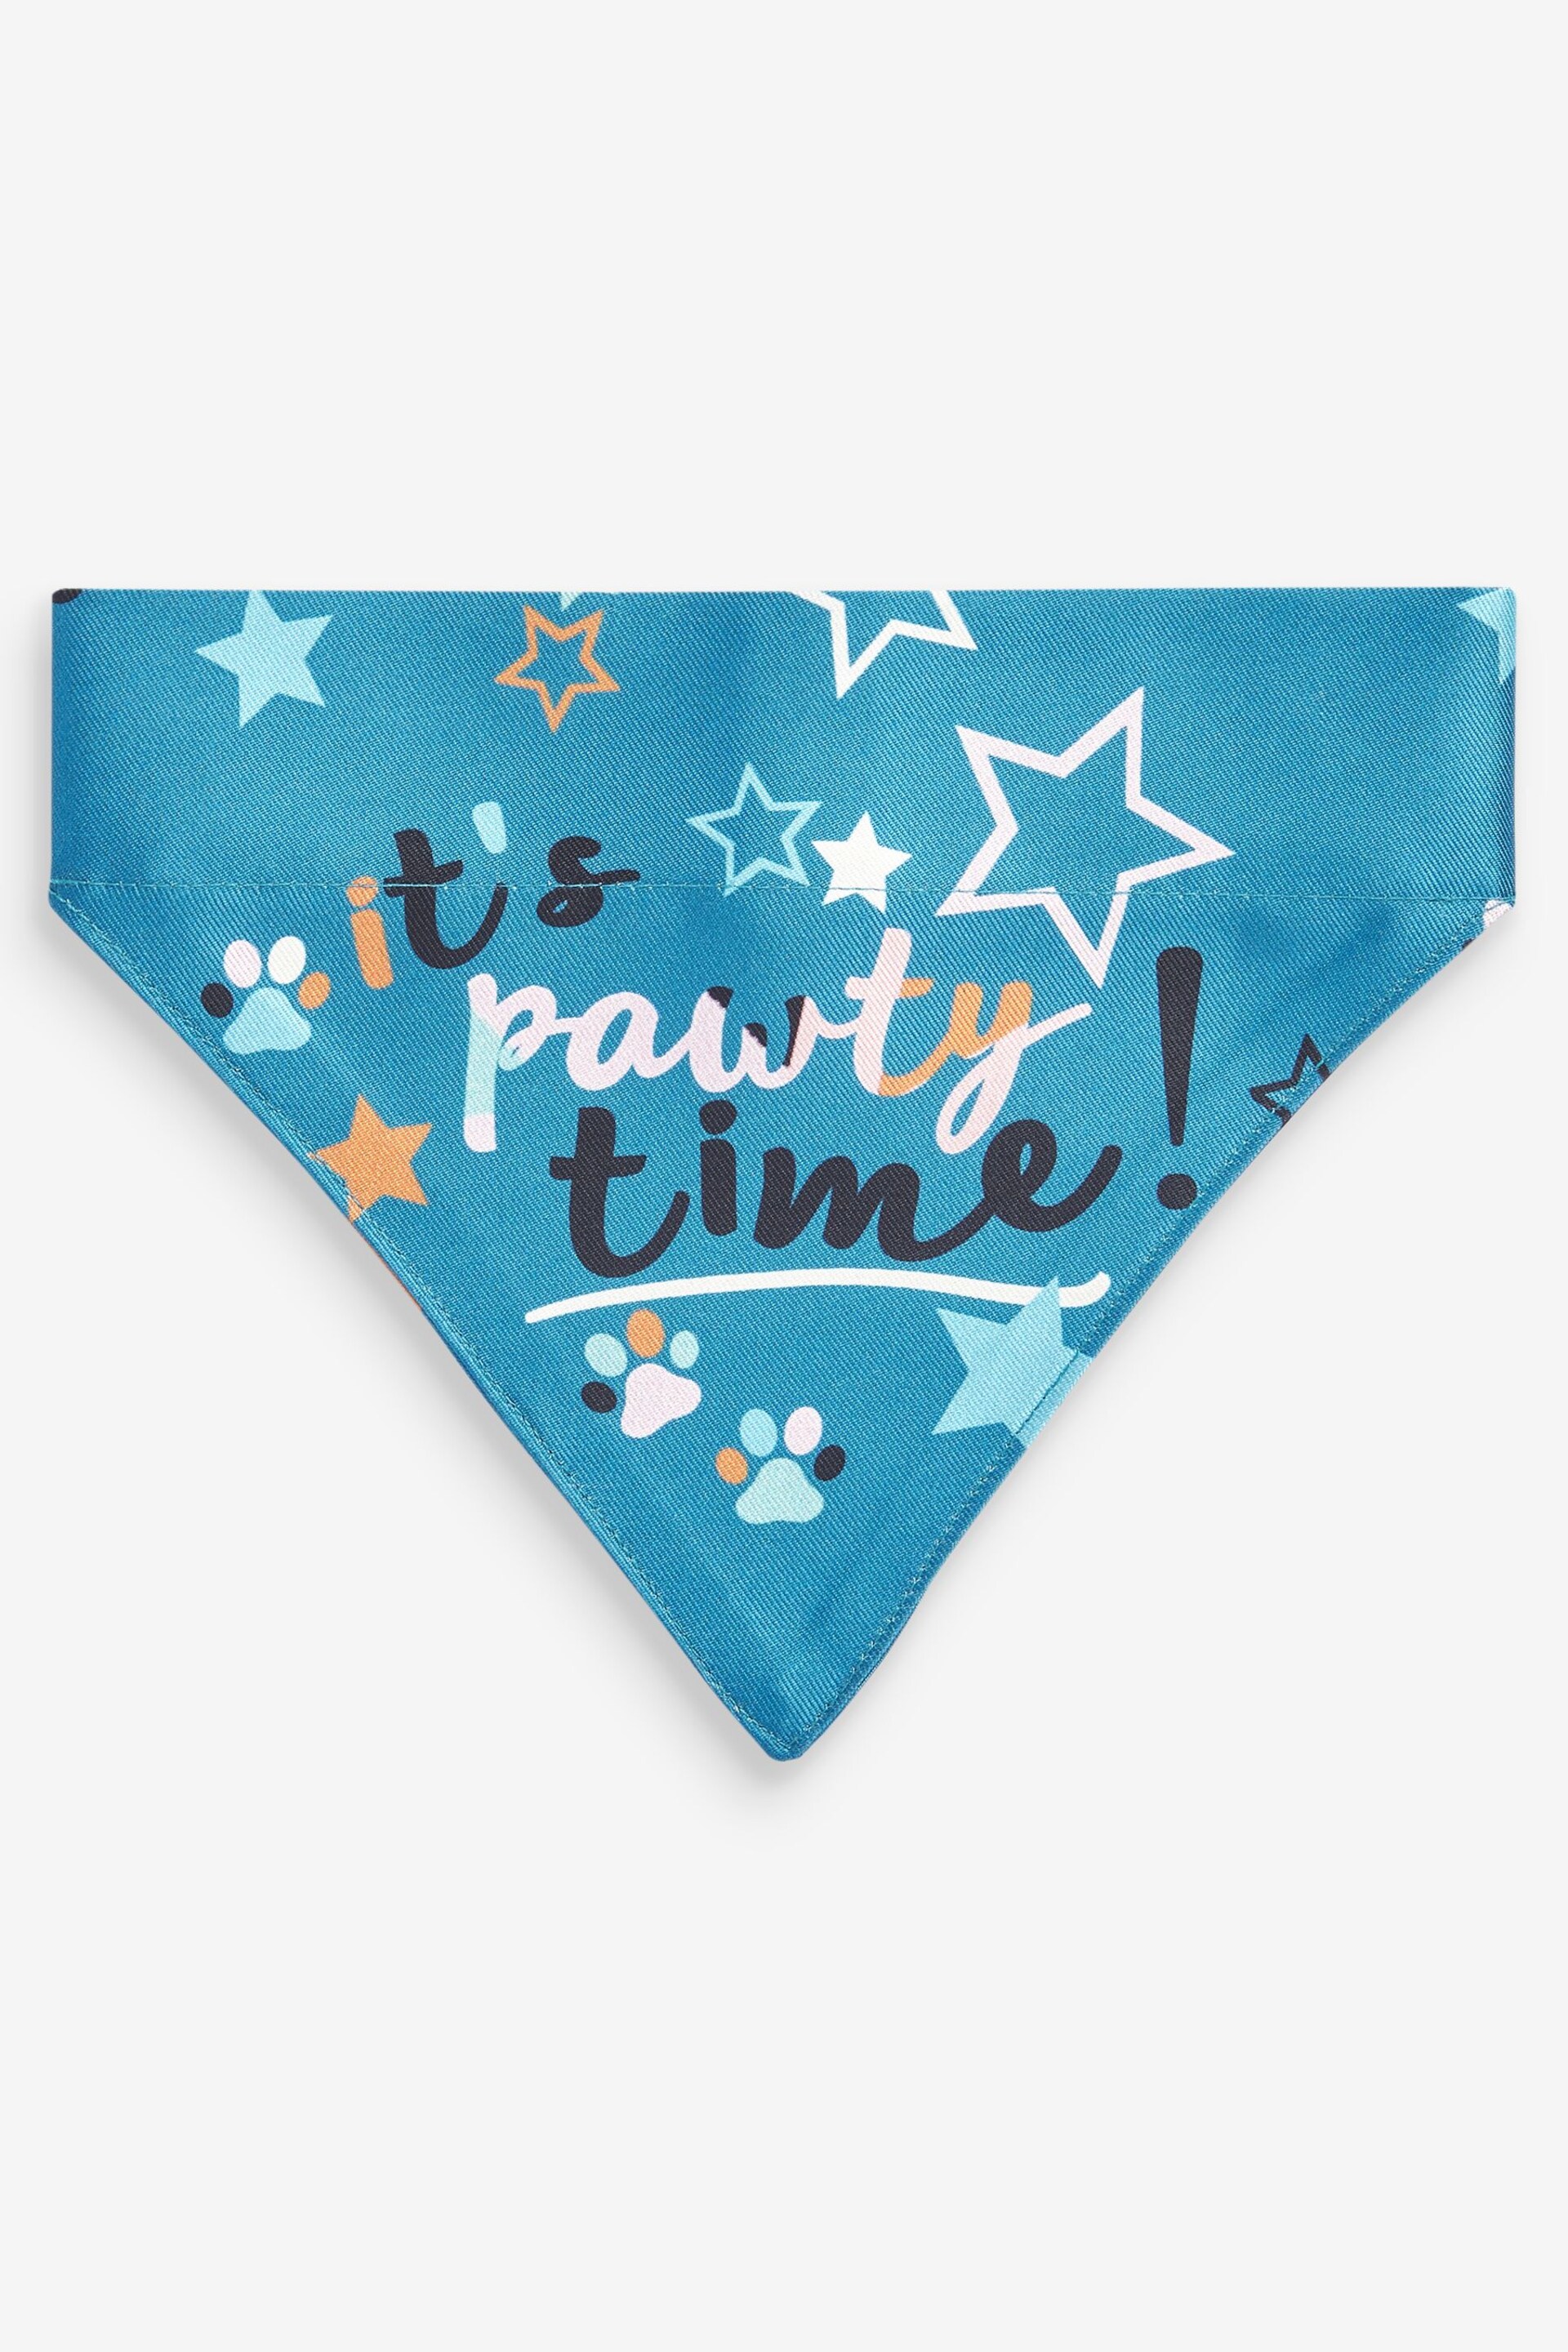 Teal Blue Party Time Pet Bandana - Image 1 of 2